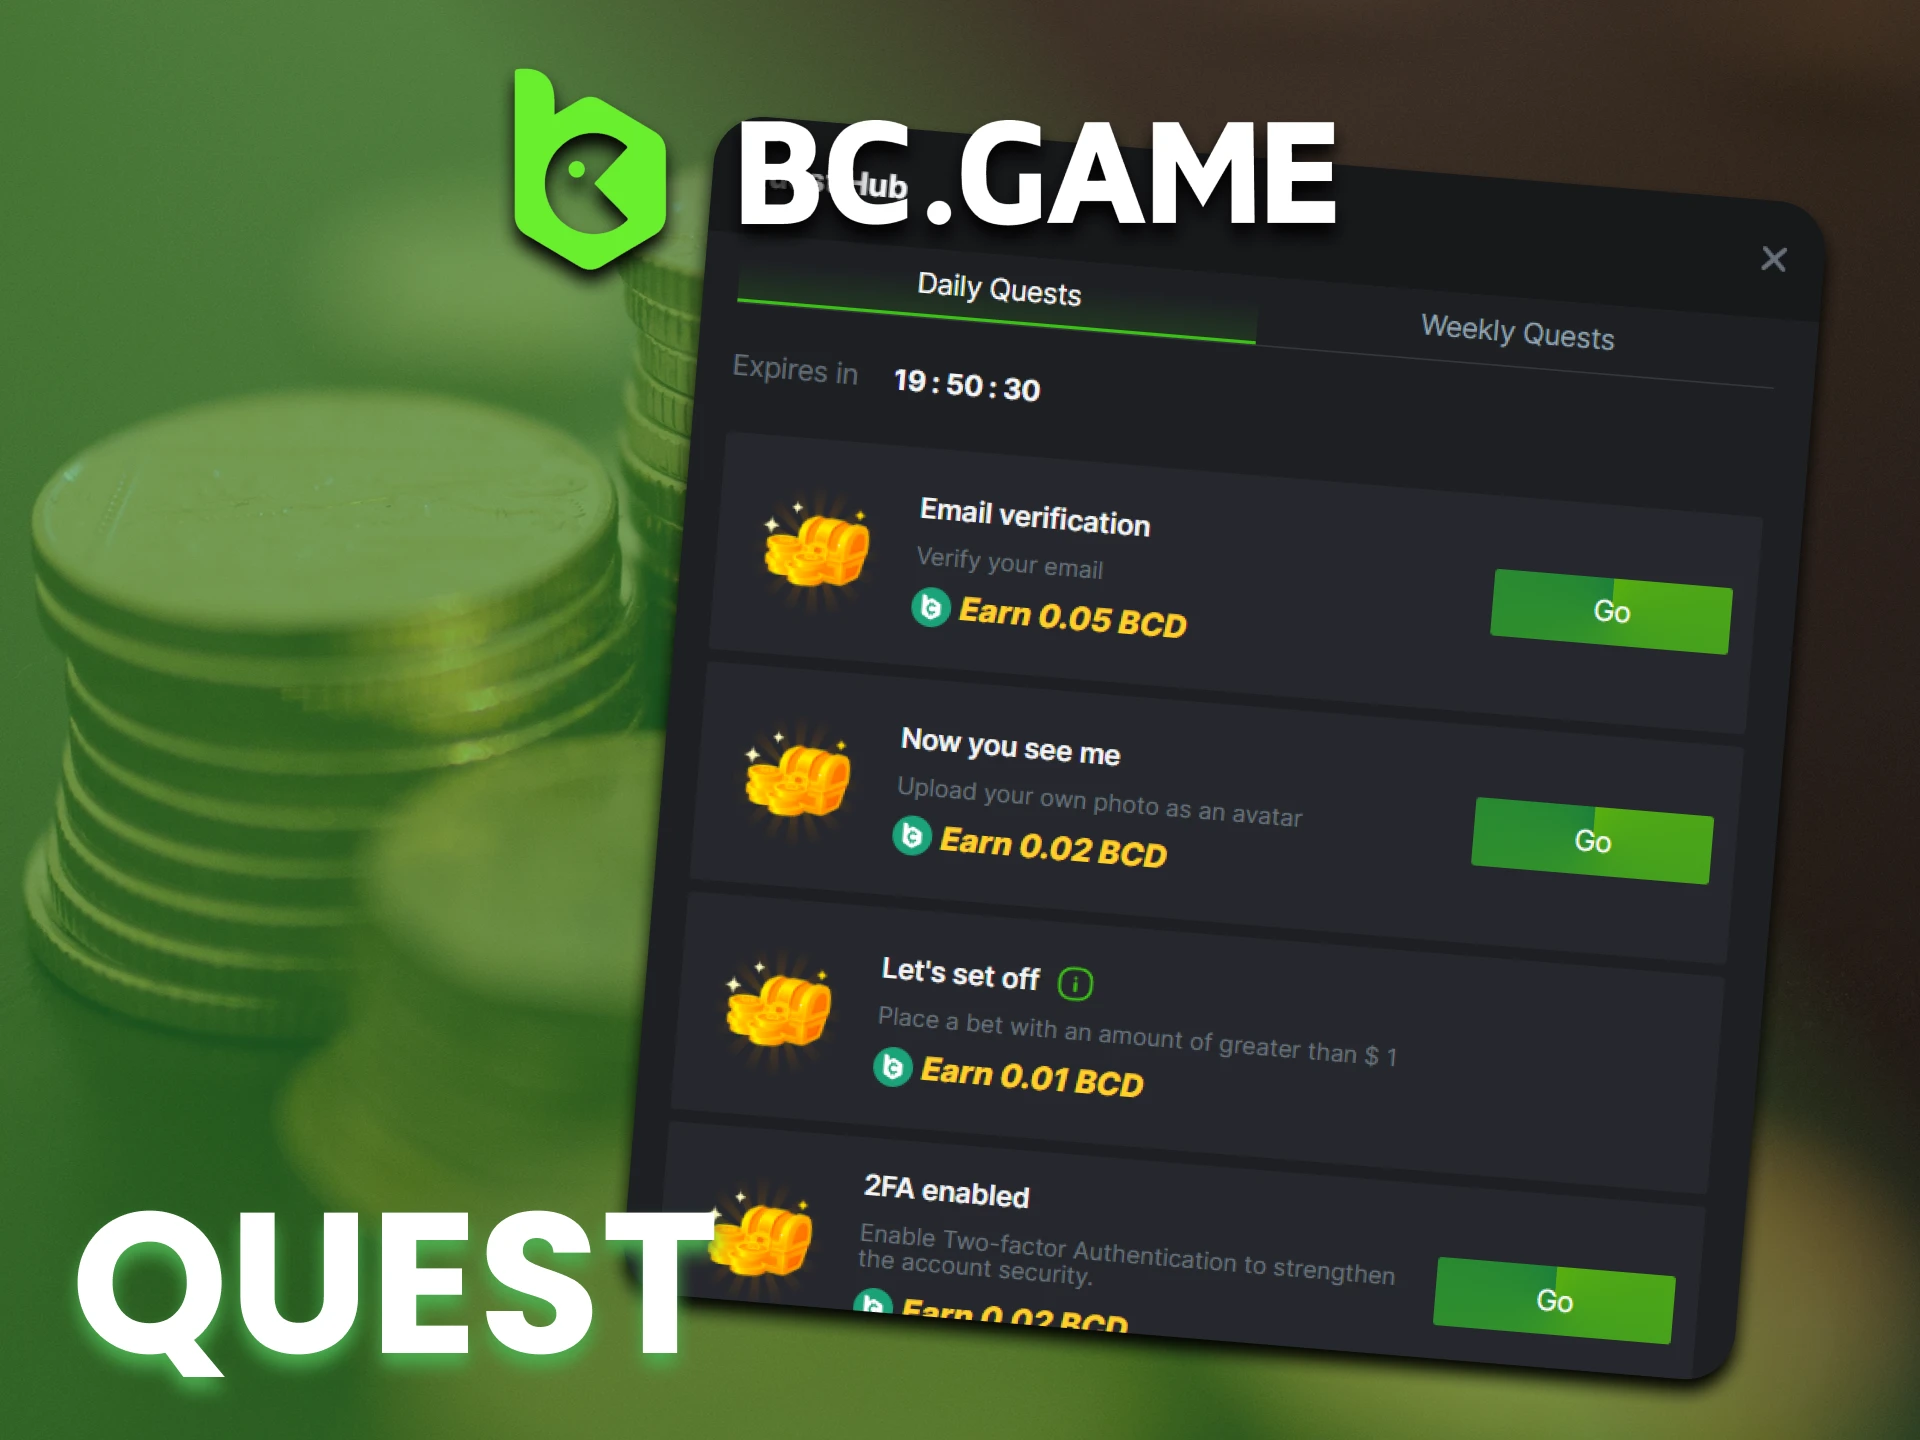 Complete BC Game quests and get additional bonuses.